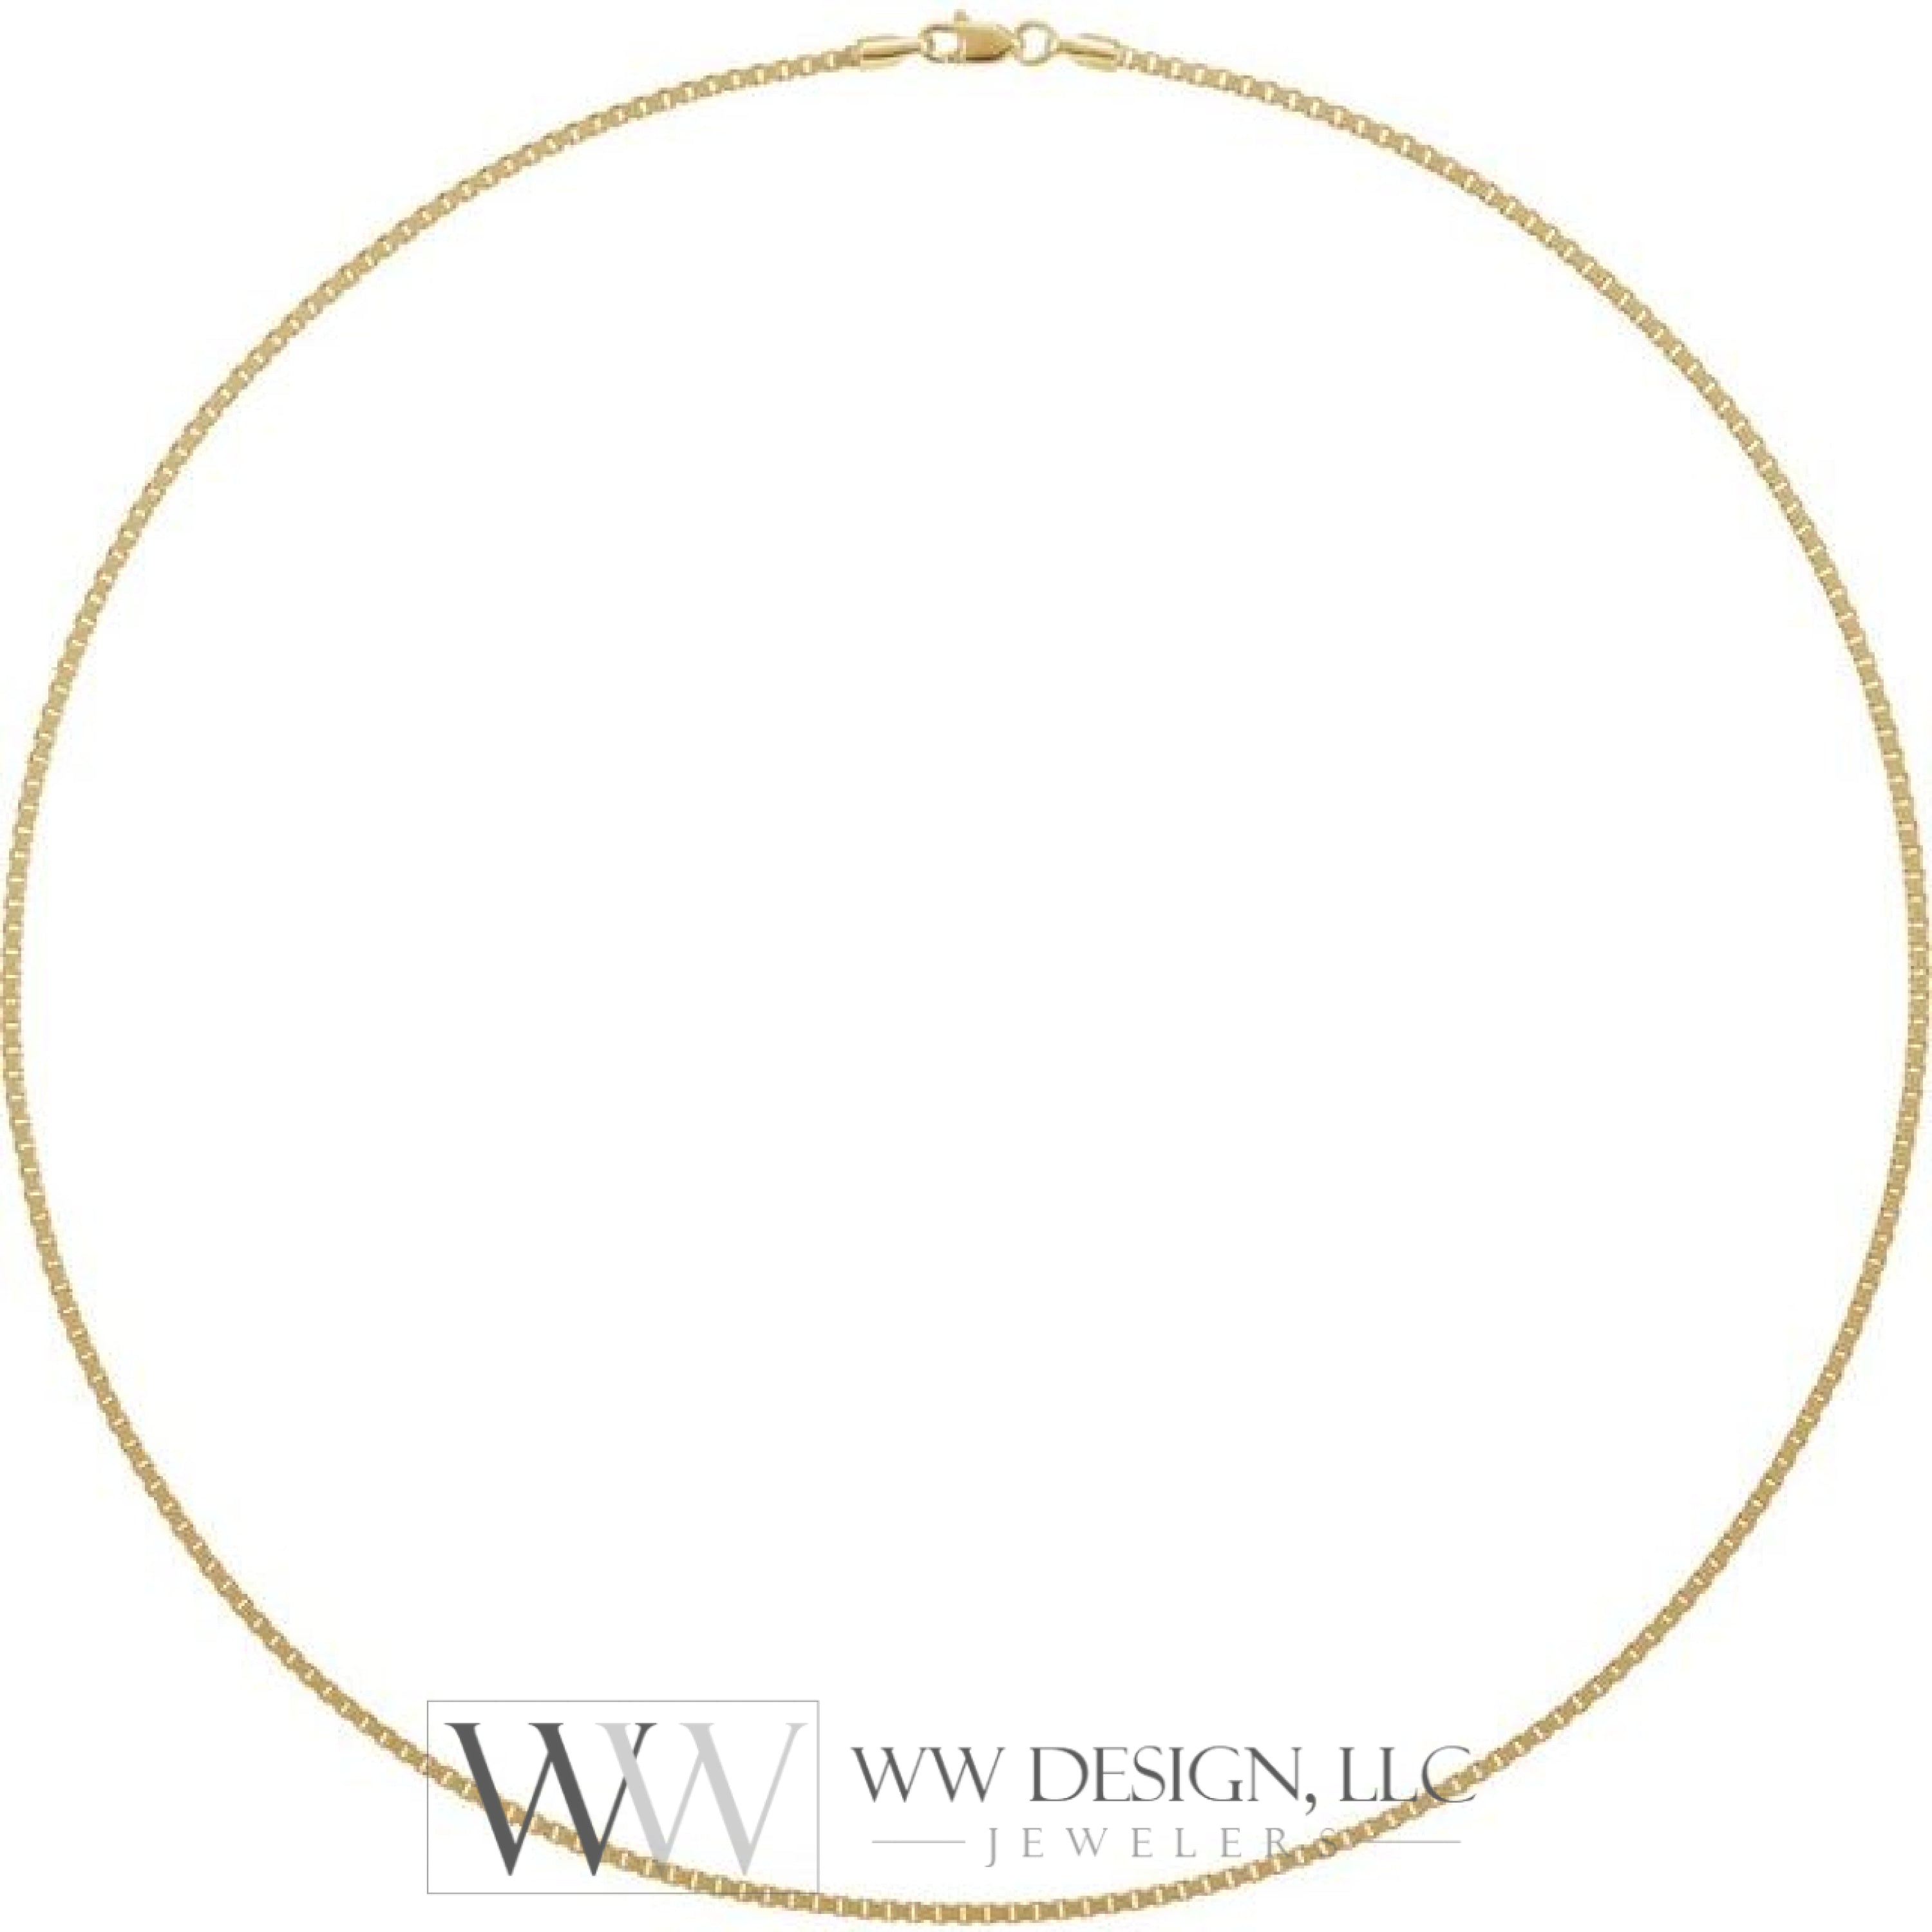 1.82Mm Box Chain Bracelet Or Necklace - 14K Gold (Y R W) Sterling Silver